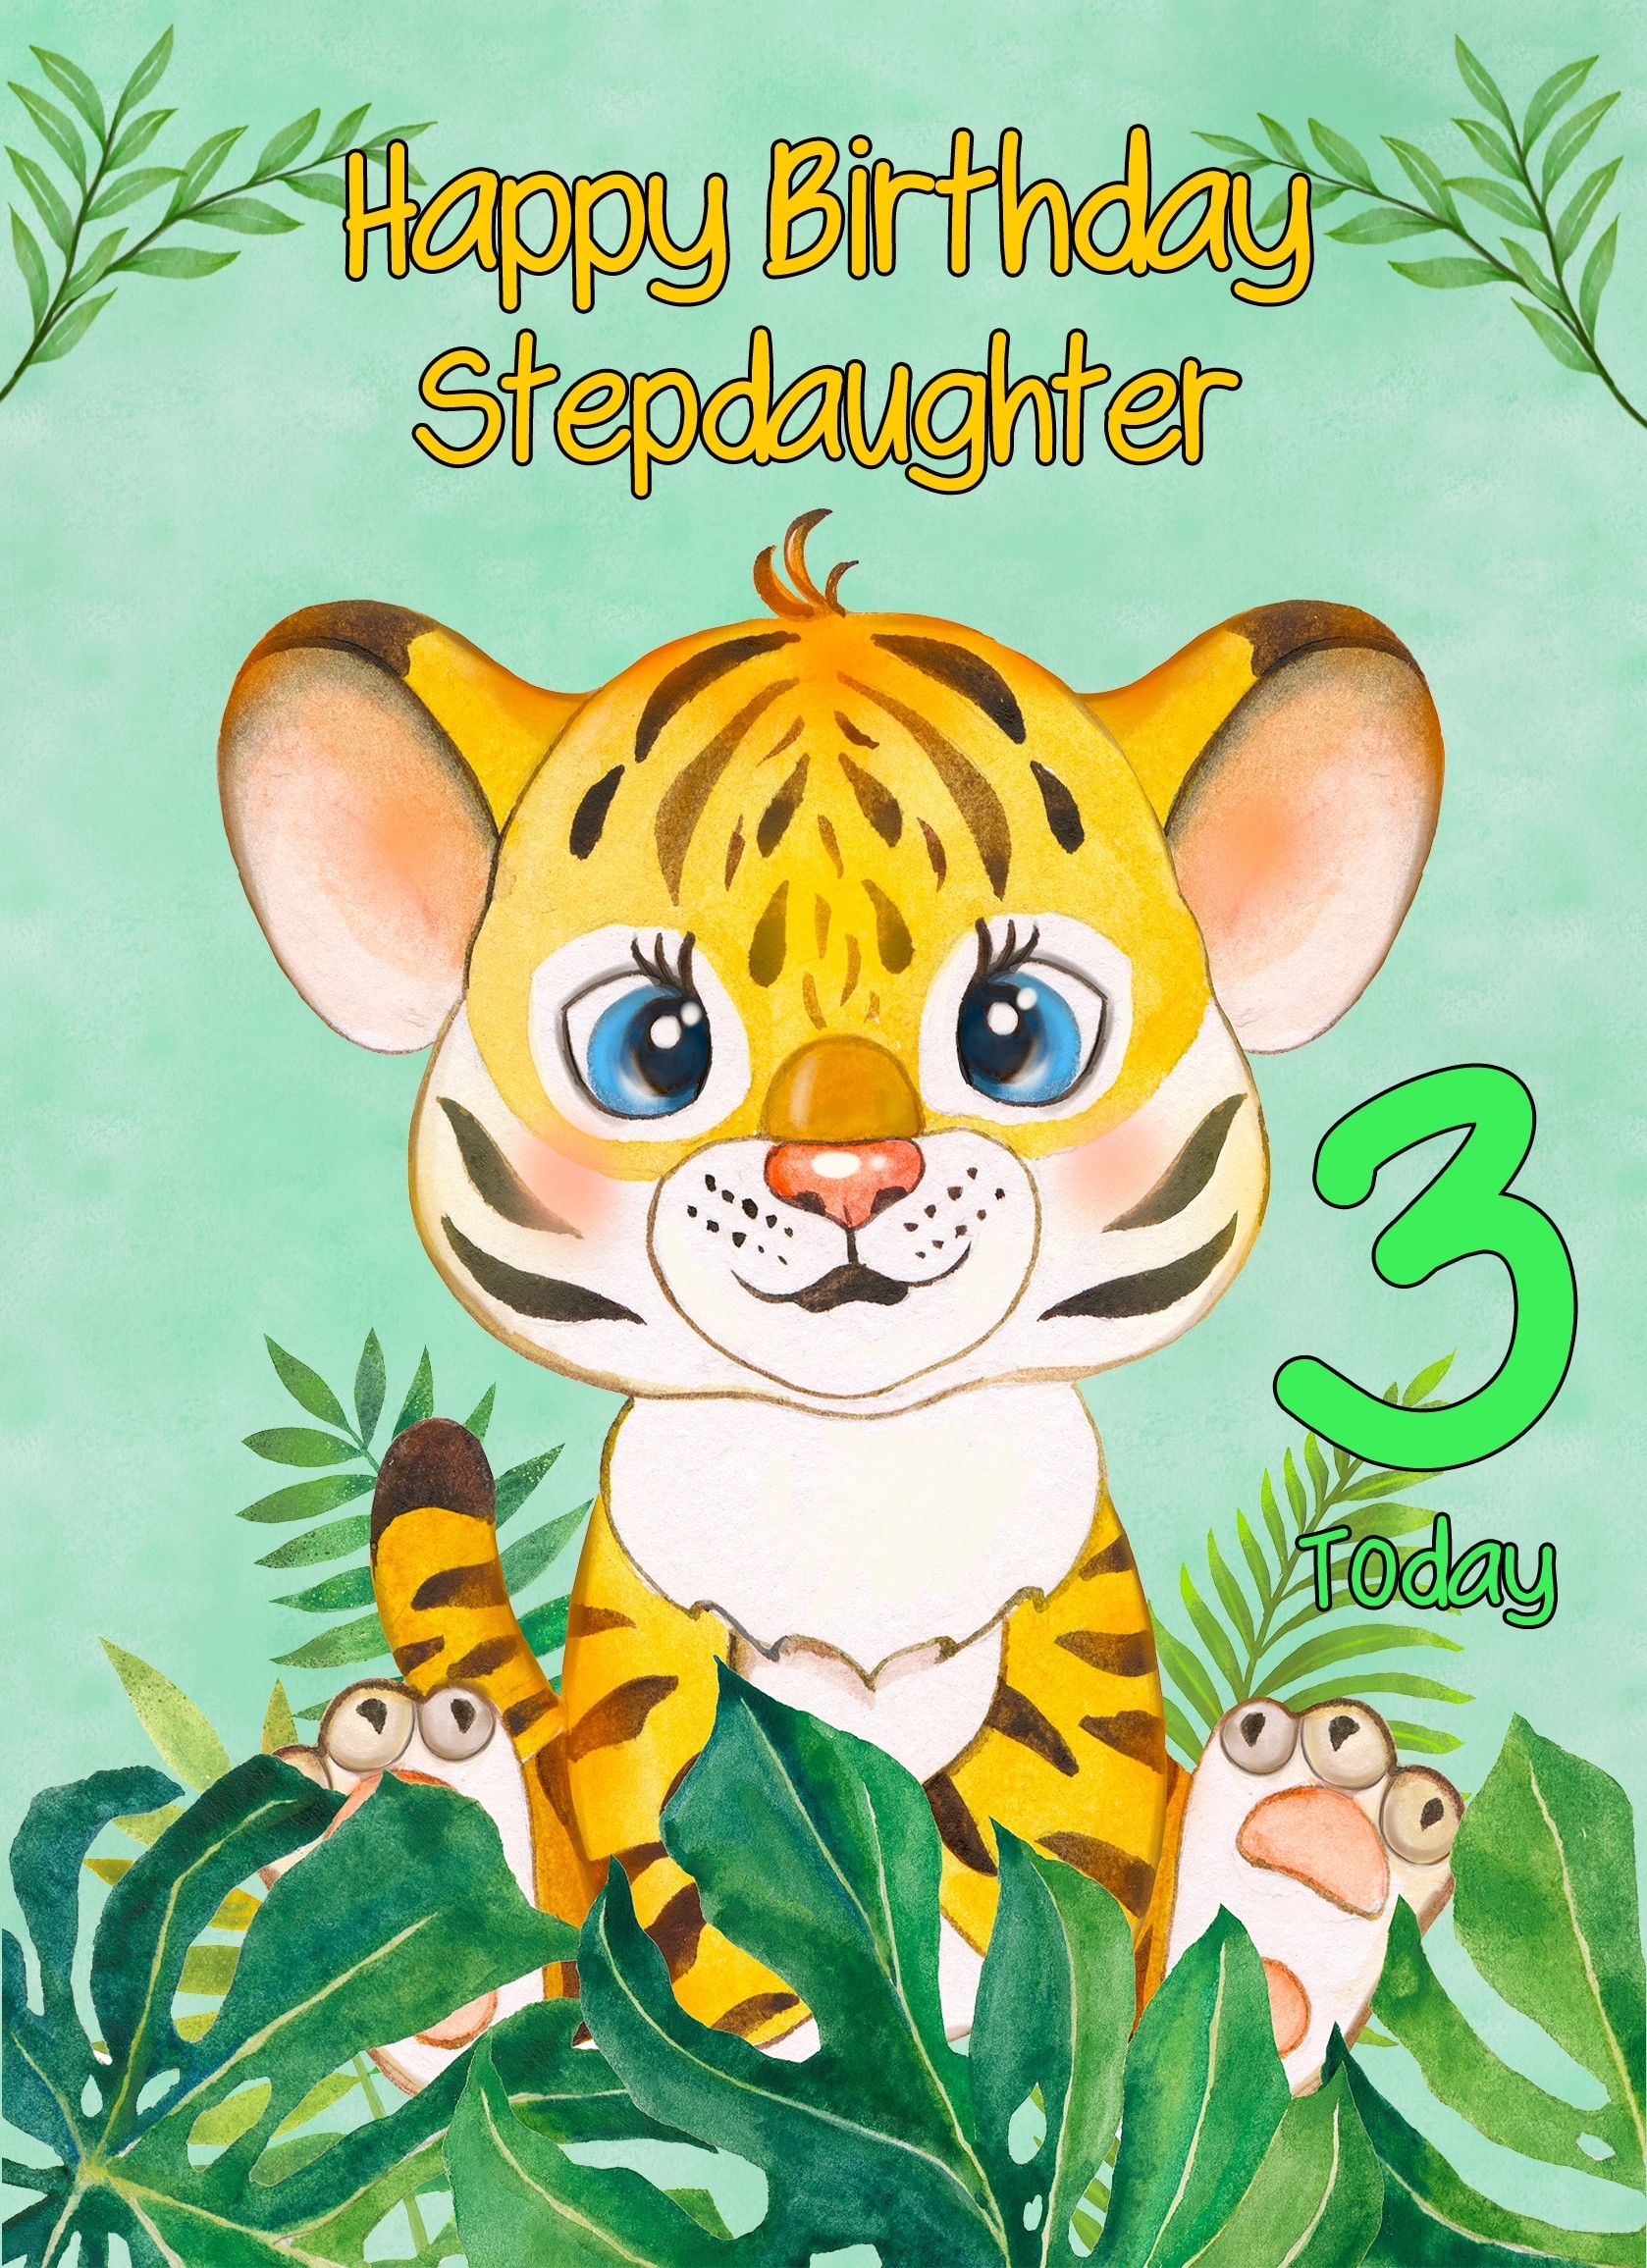 3rd Birthday Card for Stepdaughter (Tiger)